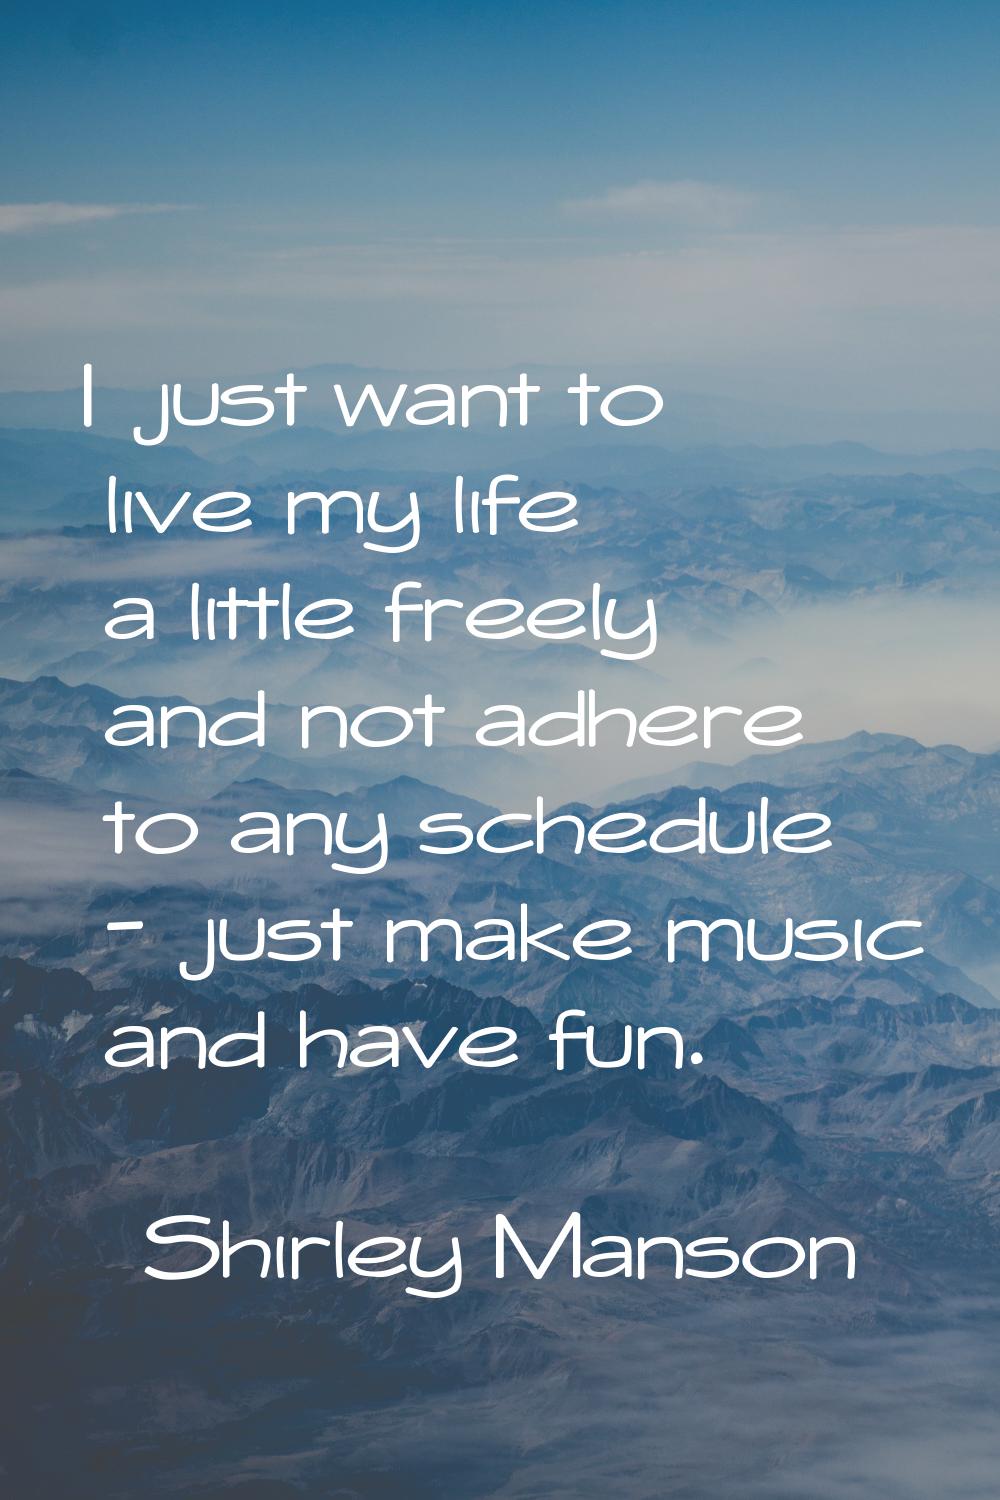 I just want to live my life a little freely and not adhere to any schedule - just make music and ha